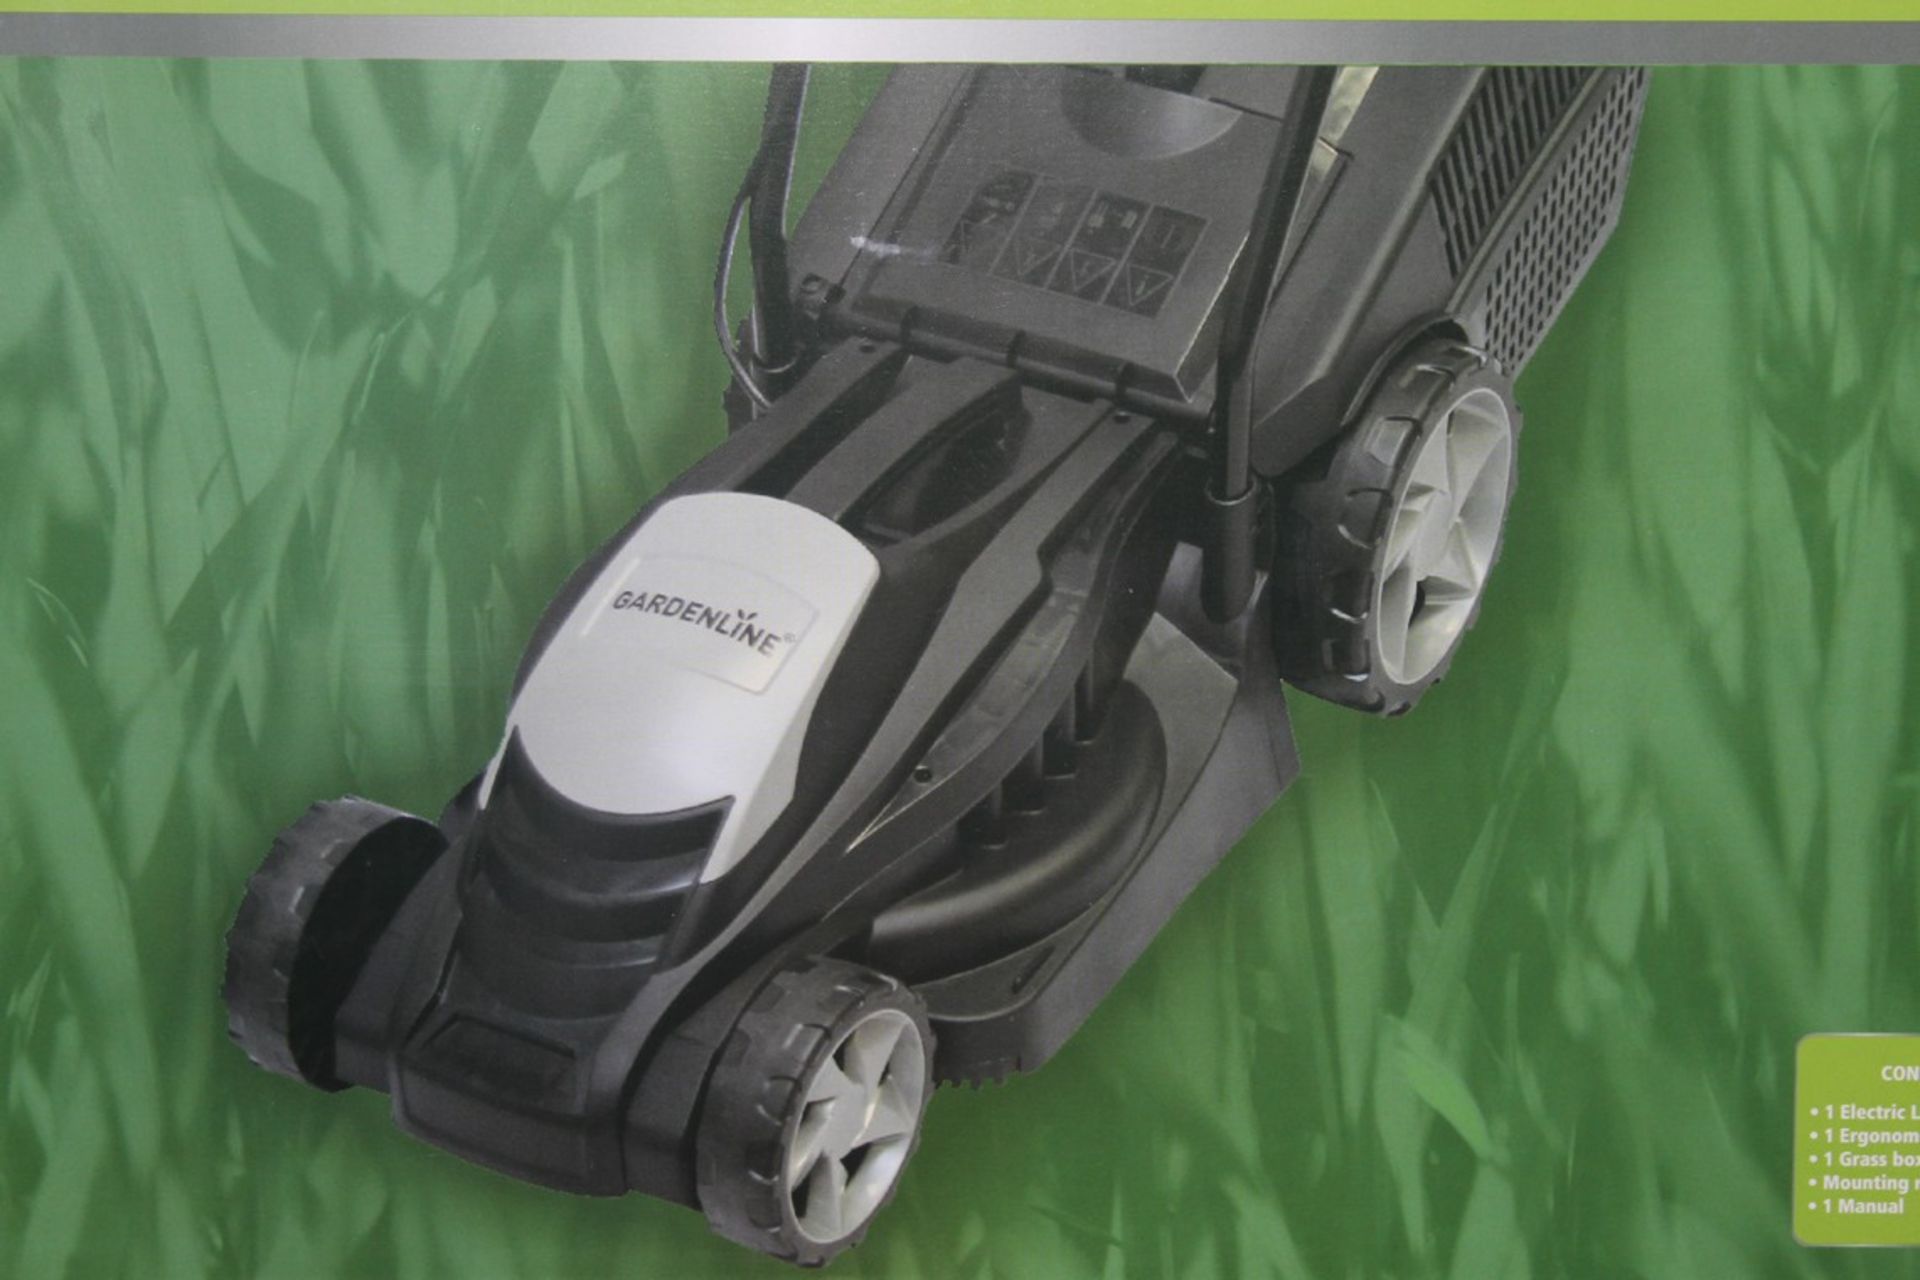 Boxed Gardenline Electric Lawn Mower RRP £45 (Public Viewing and Appraisals Available)